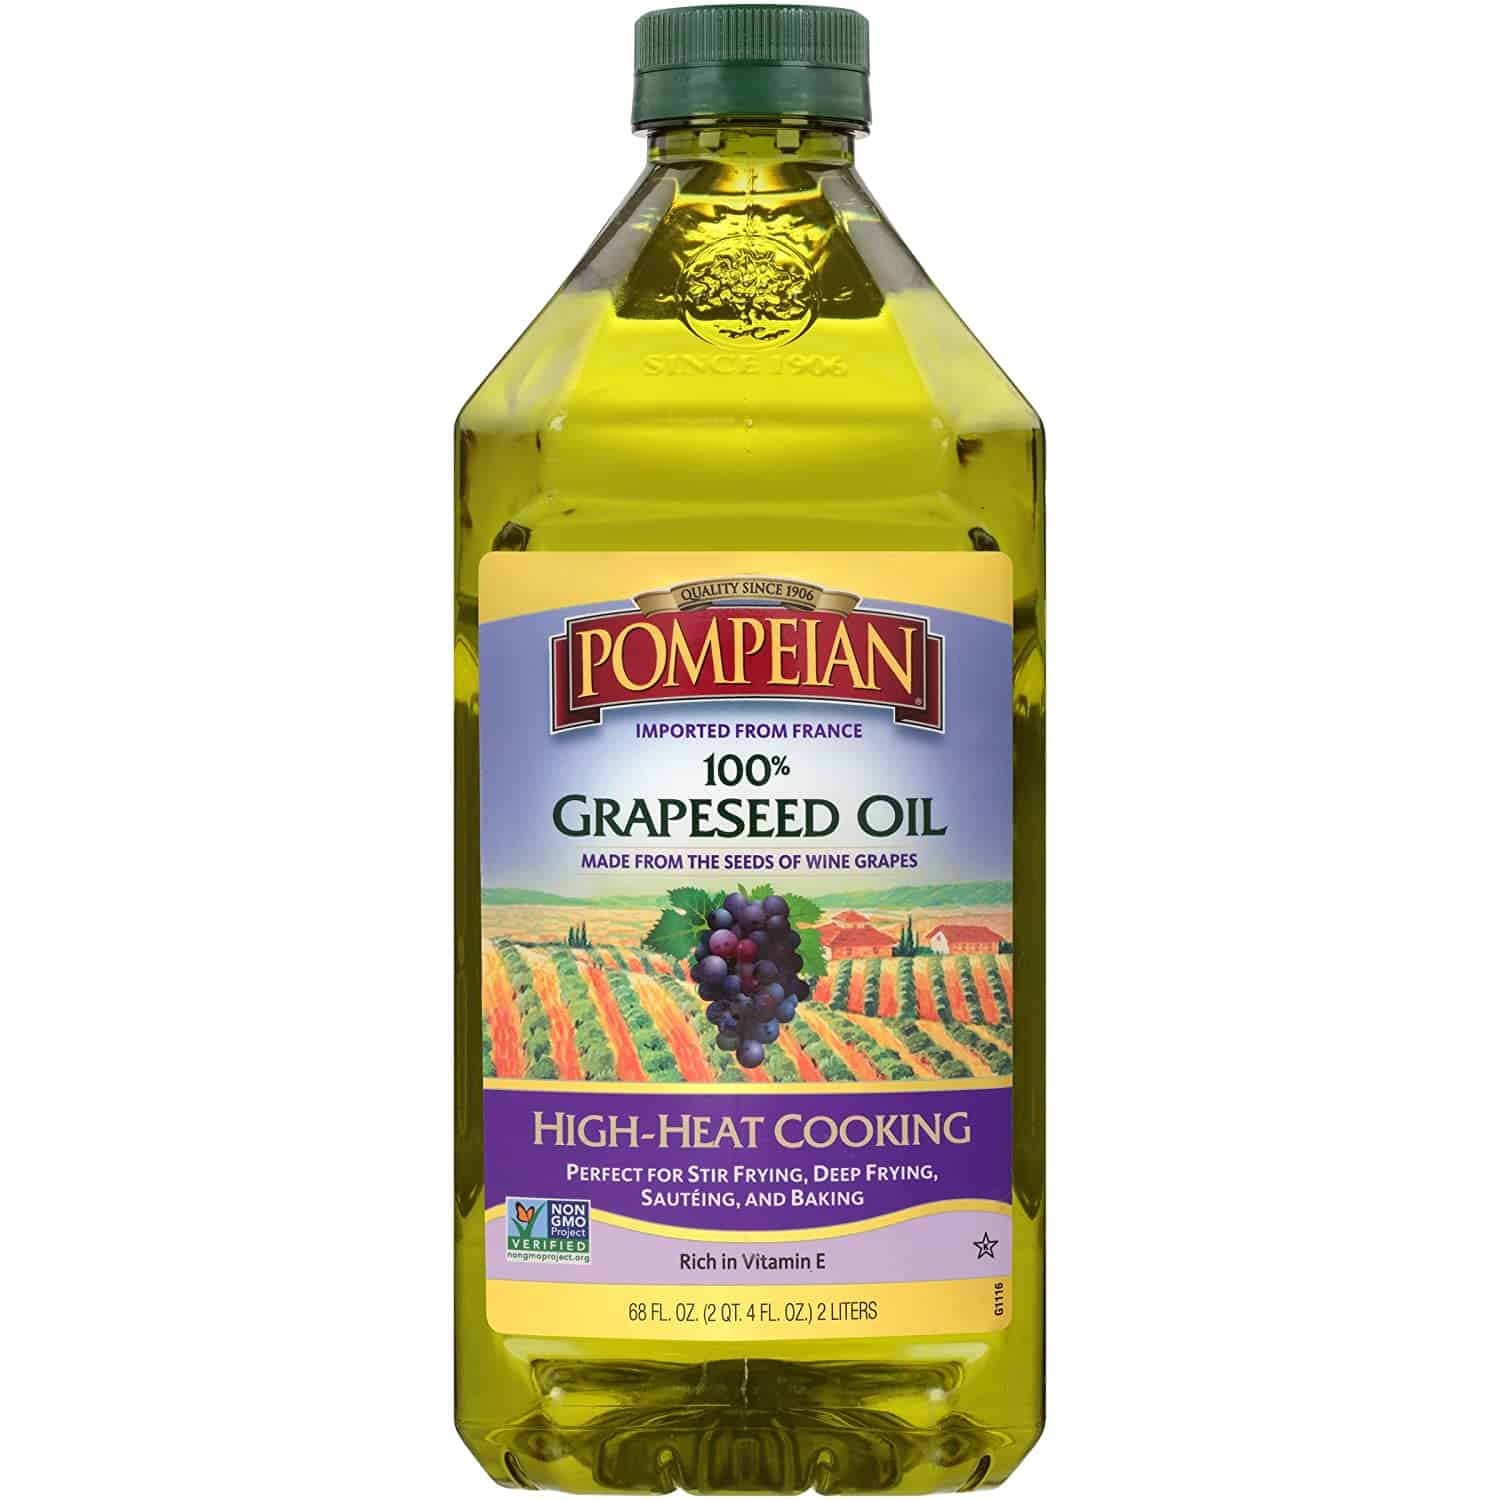 Use Pompeian 100% Grapeseed Oil as a substitute for sesame oil